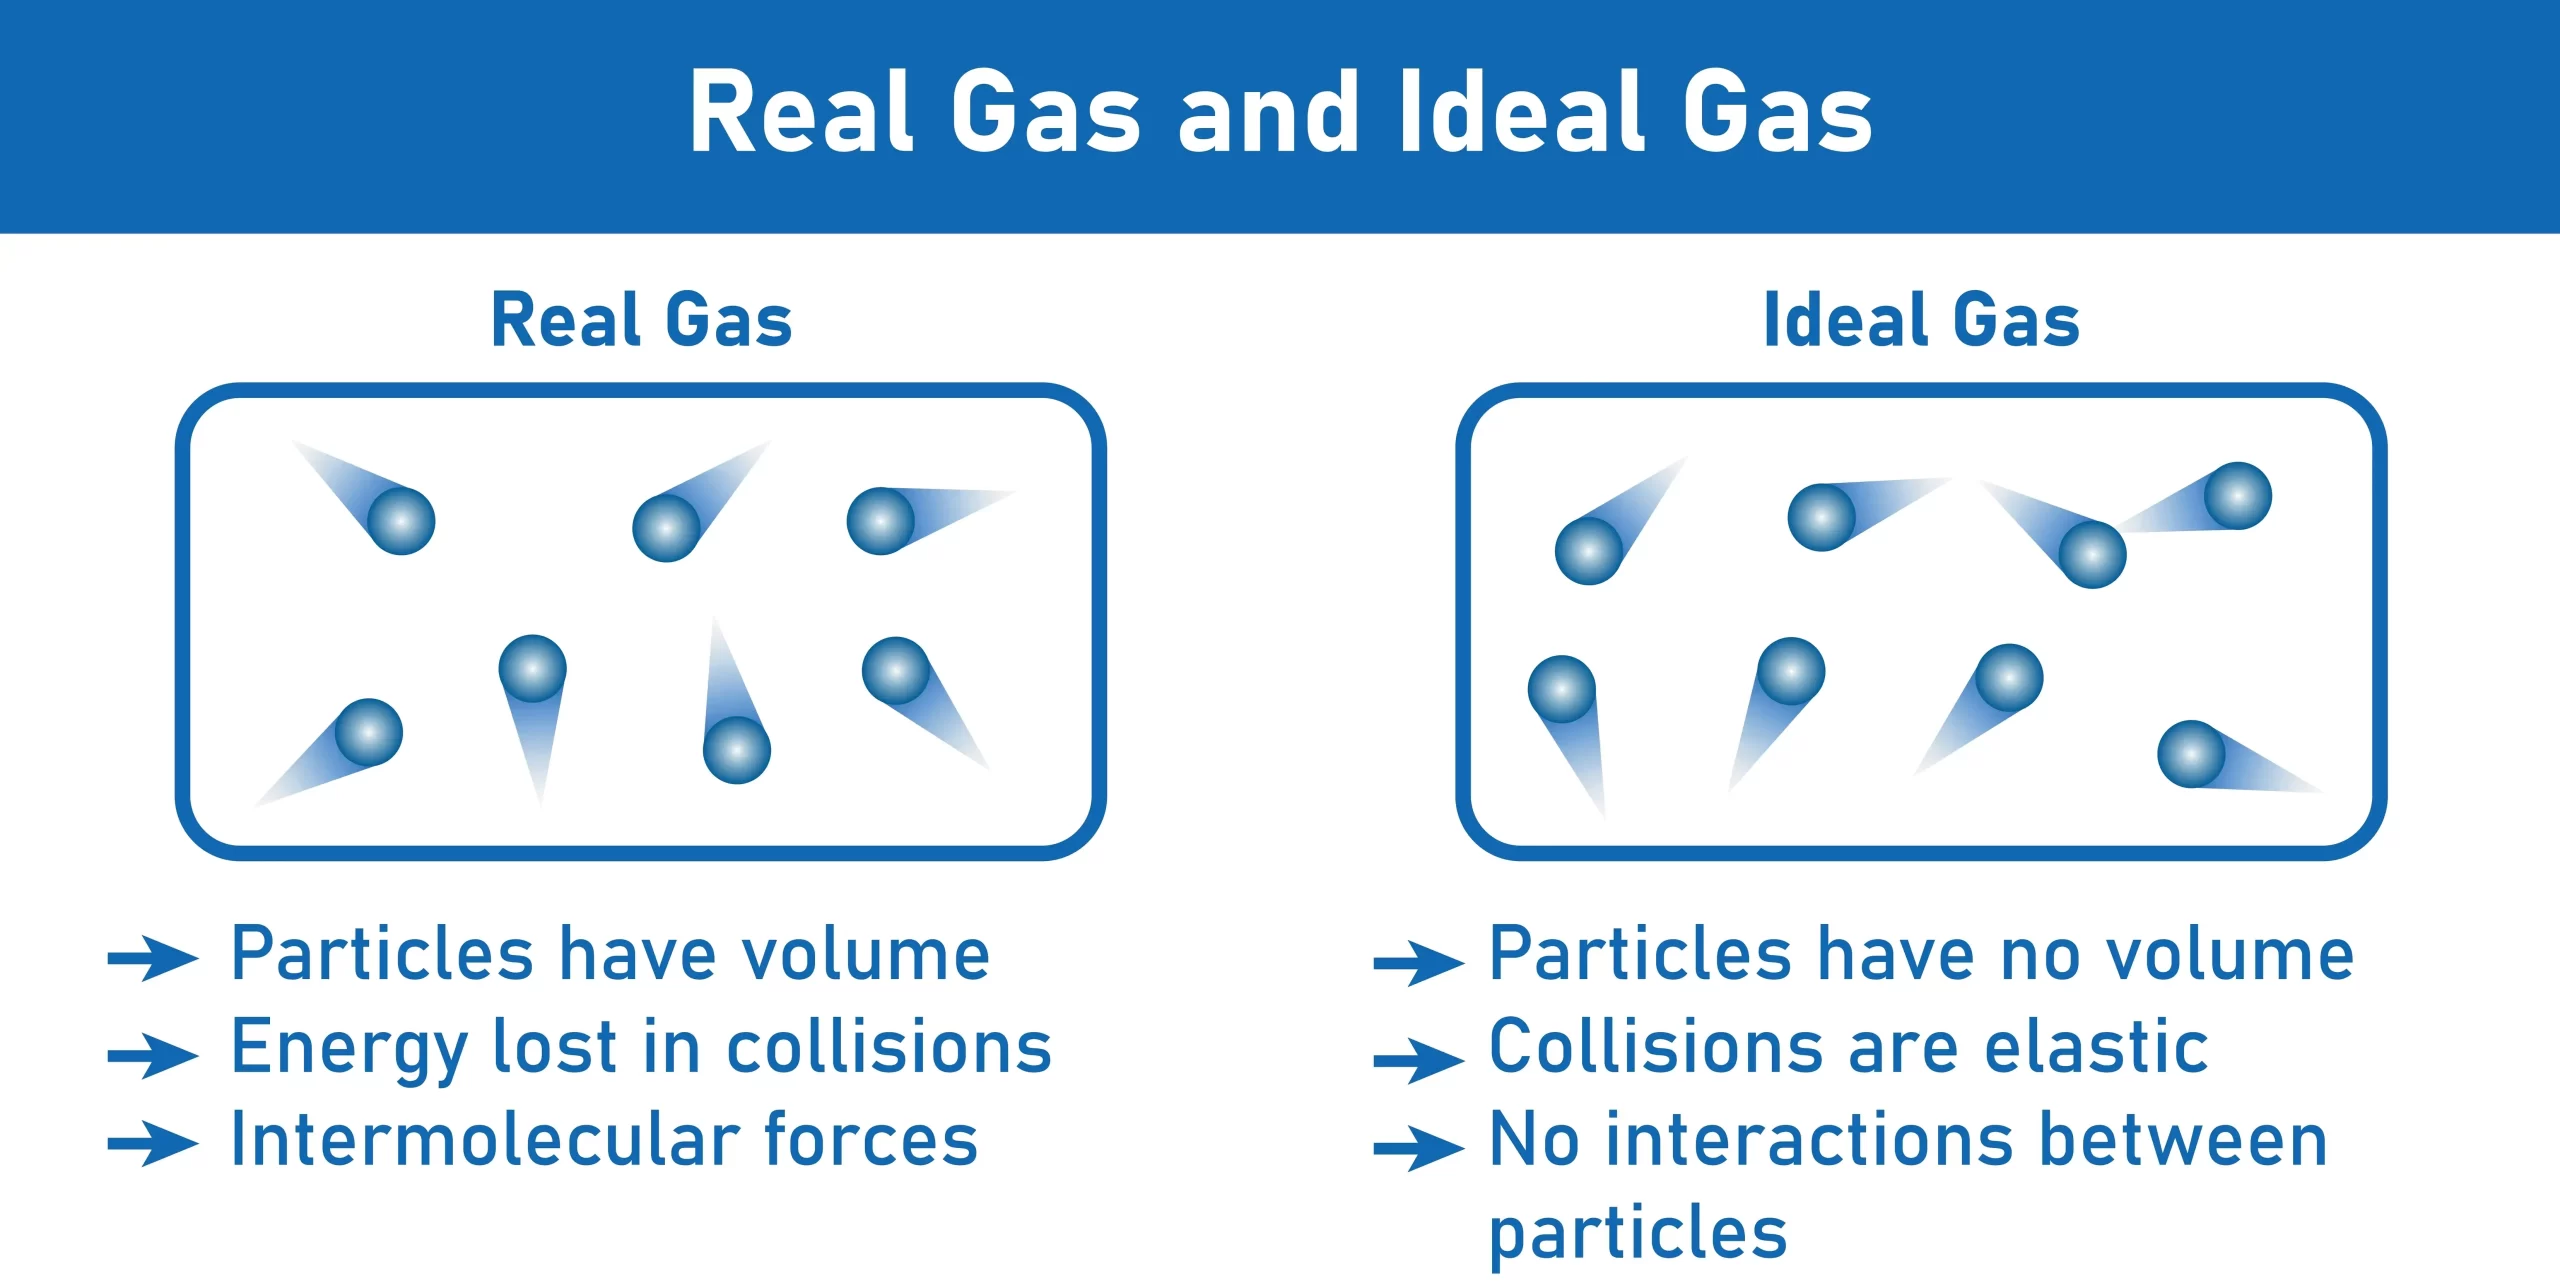 Real gases